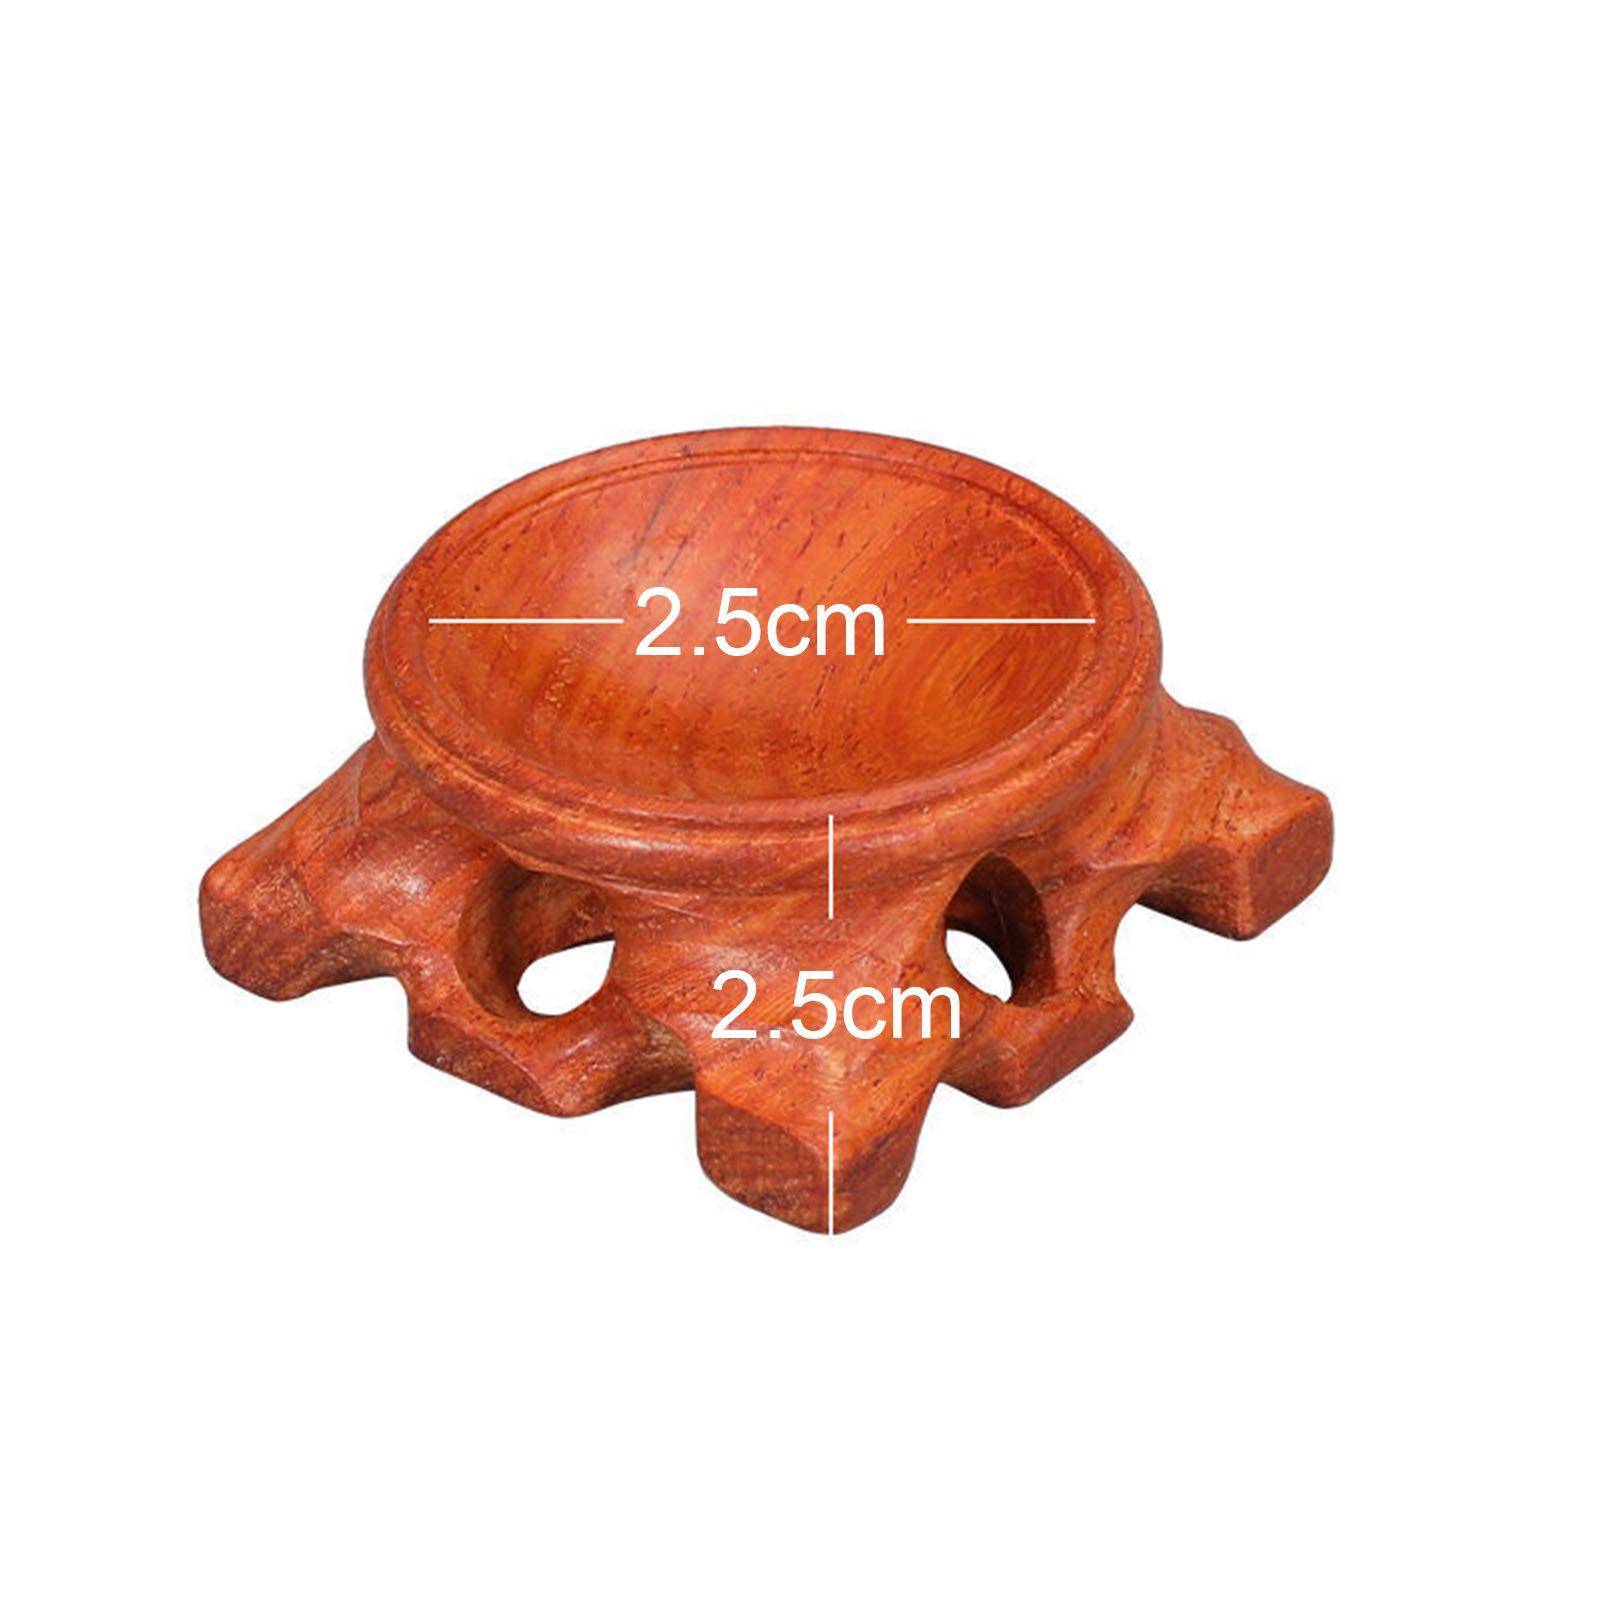 Small Wooden Display Stand Wood Holder Base Collectibles for Office Desktop 2.5cmx2.5cm